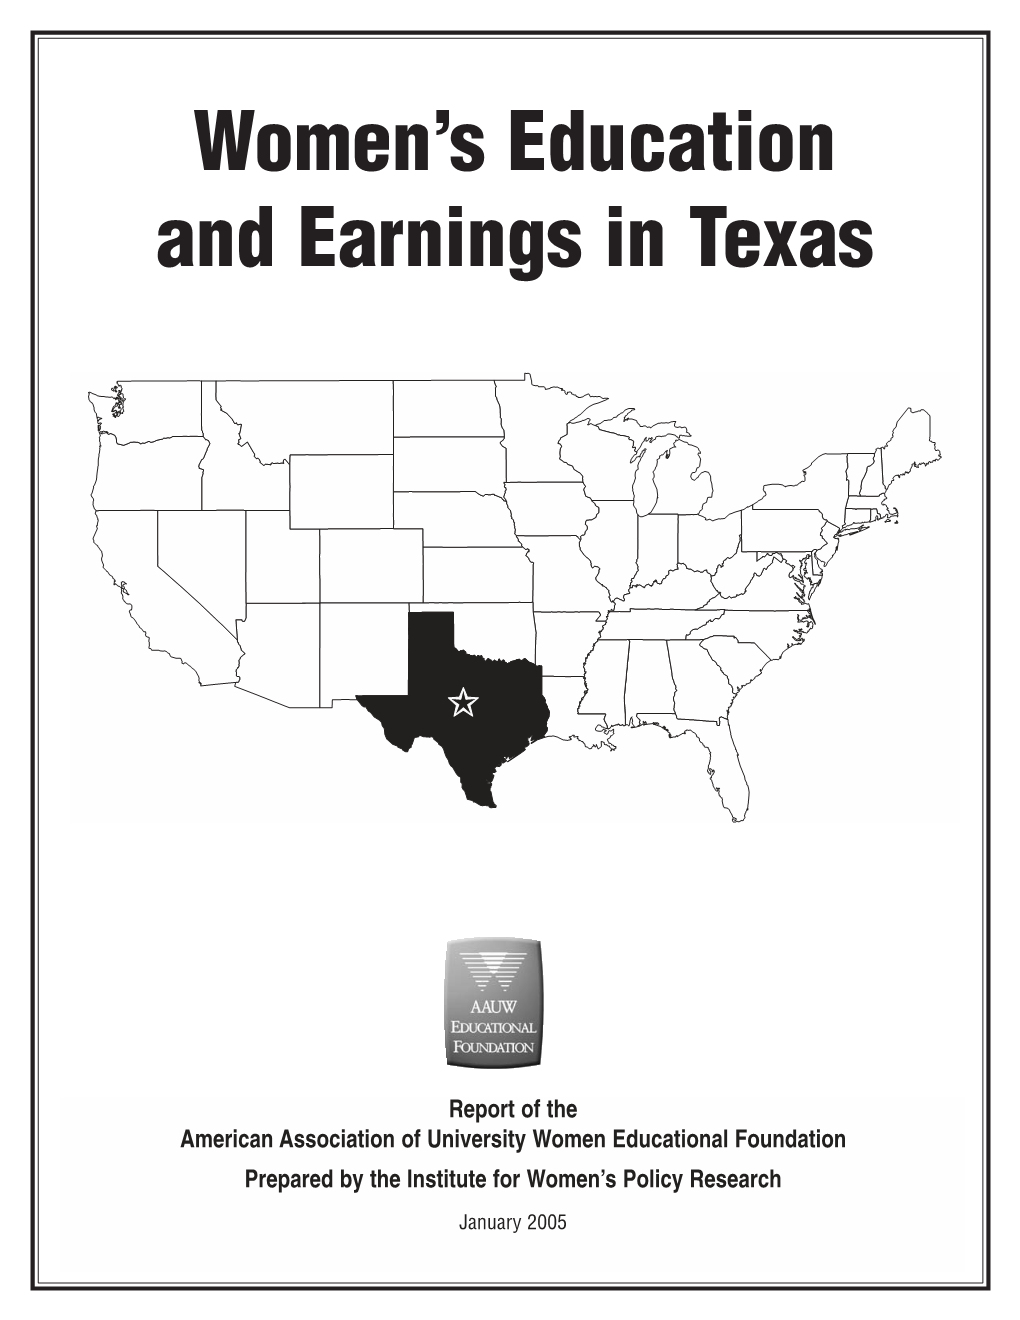 Women's Education and Earnings in Texas